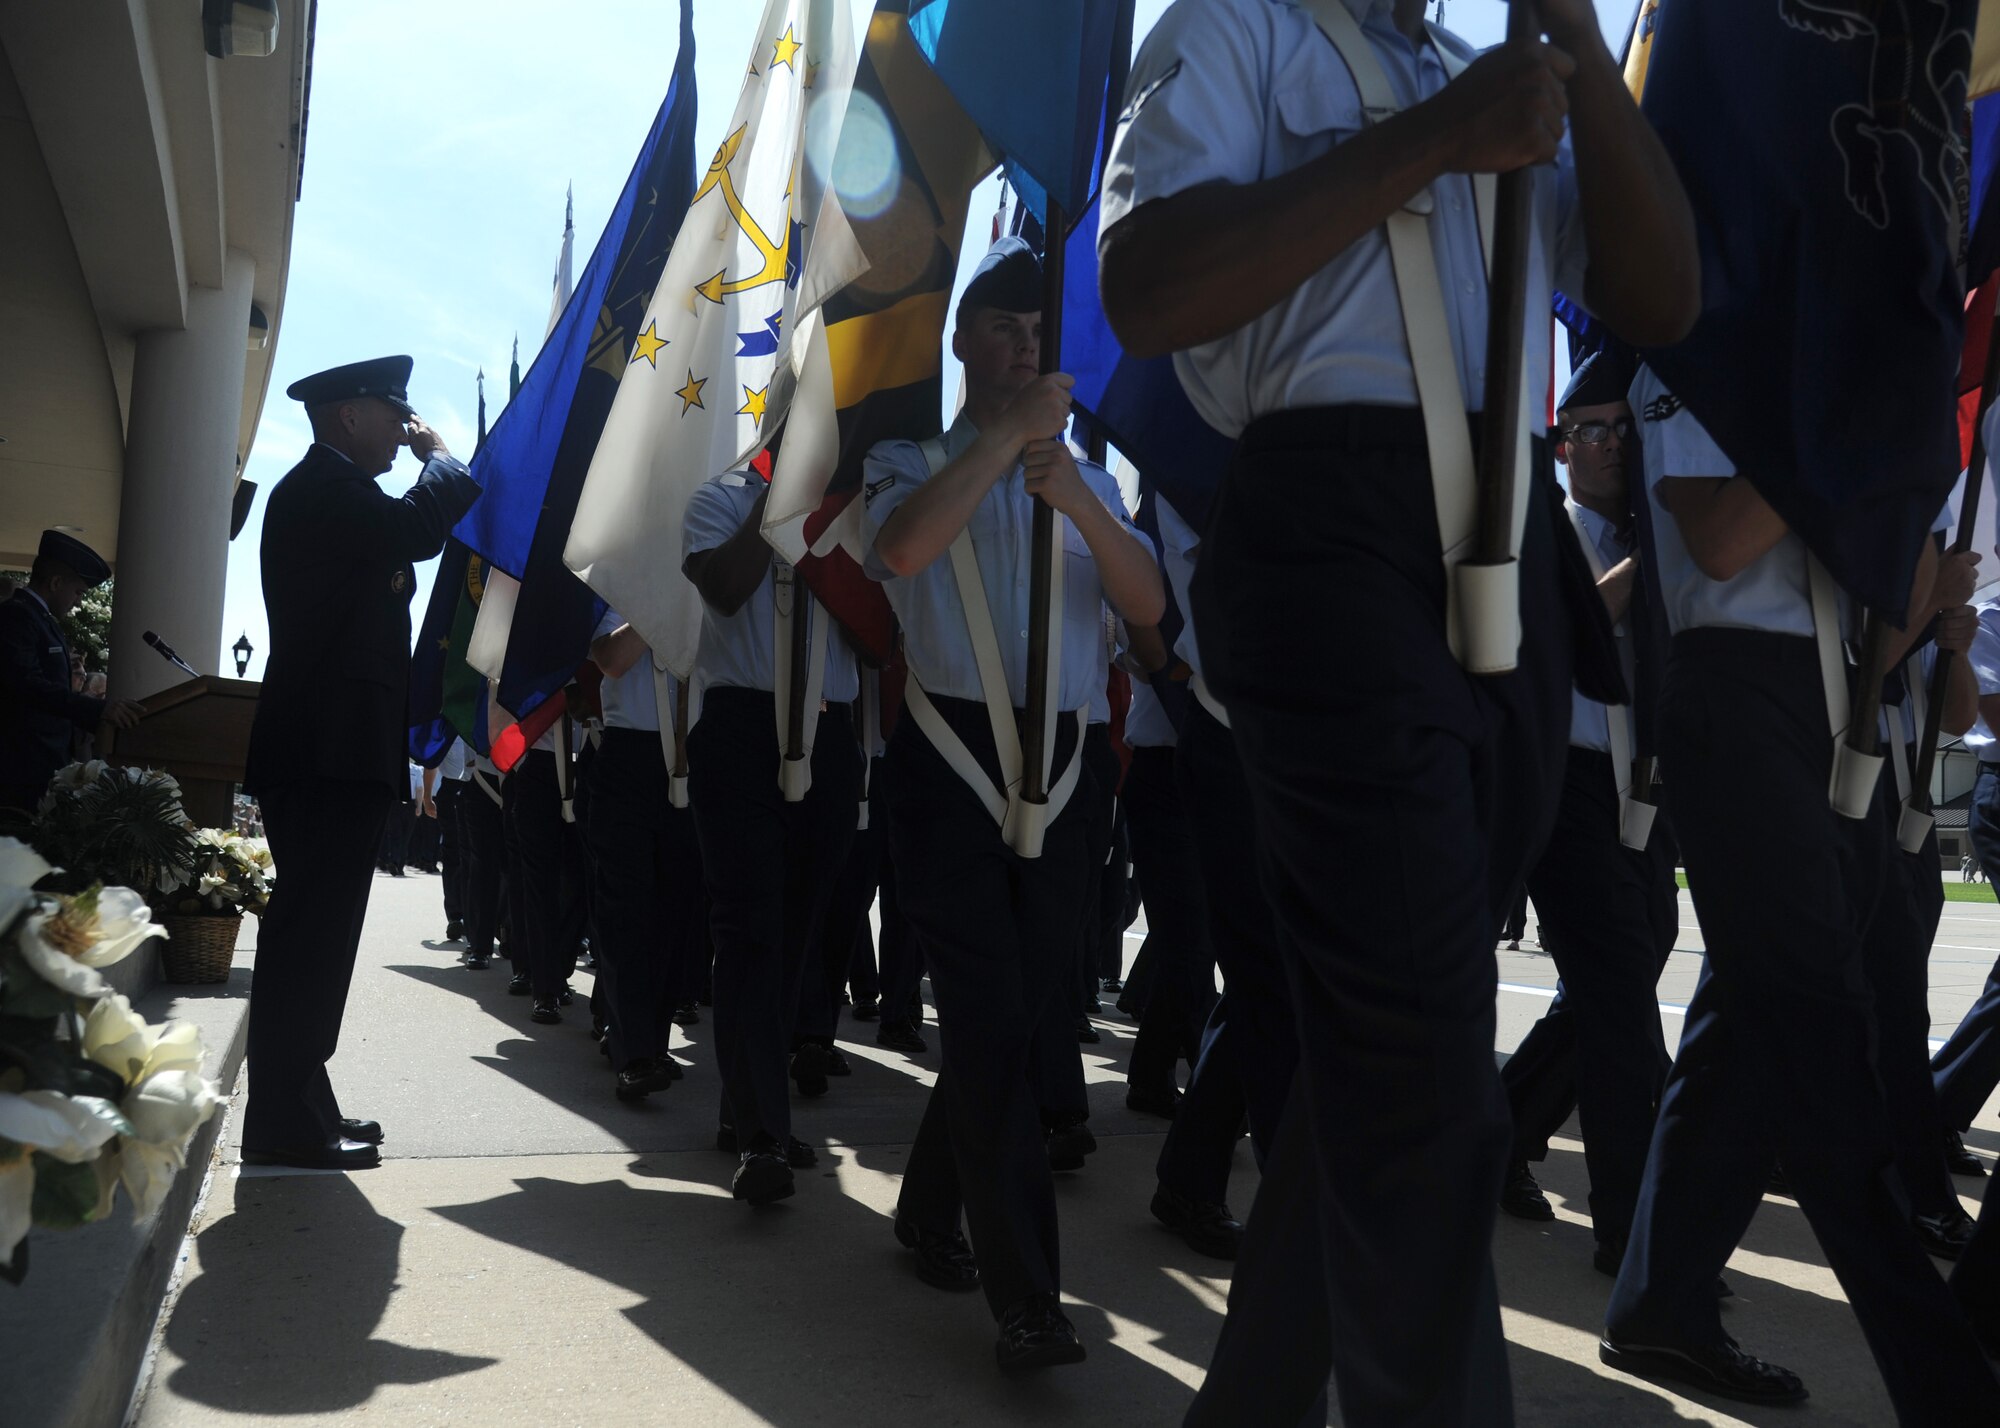 Brig. Gen. Patrick Higby, outgoing 81st Training Wing commander, salutes as members of the 336th Training Squadron carry the 50 state flags during pass and review at a change of command ceremony, June 26, 2015, Keesler Air Force Base, Miss. Col. Michele Edmondson, 81st TRW commander, took command of the 81st TRW from Higby. (U.S. Air Force photo by Senior Airman Holly Mansfield) 